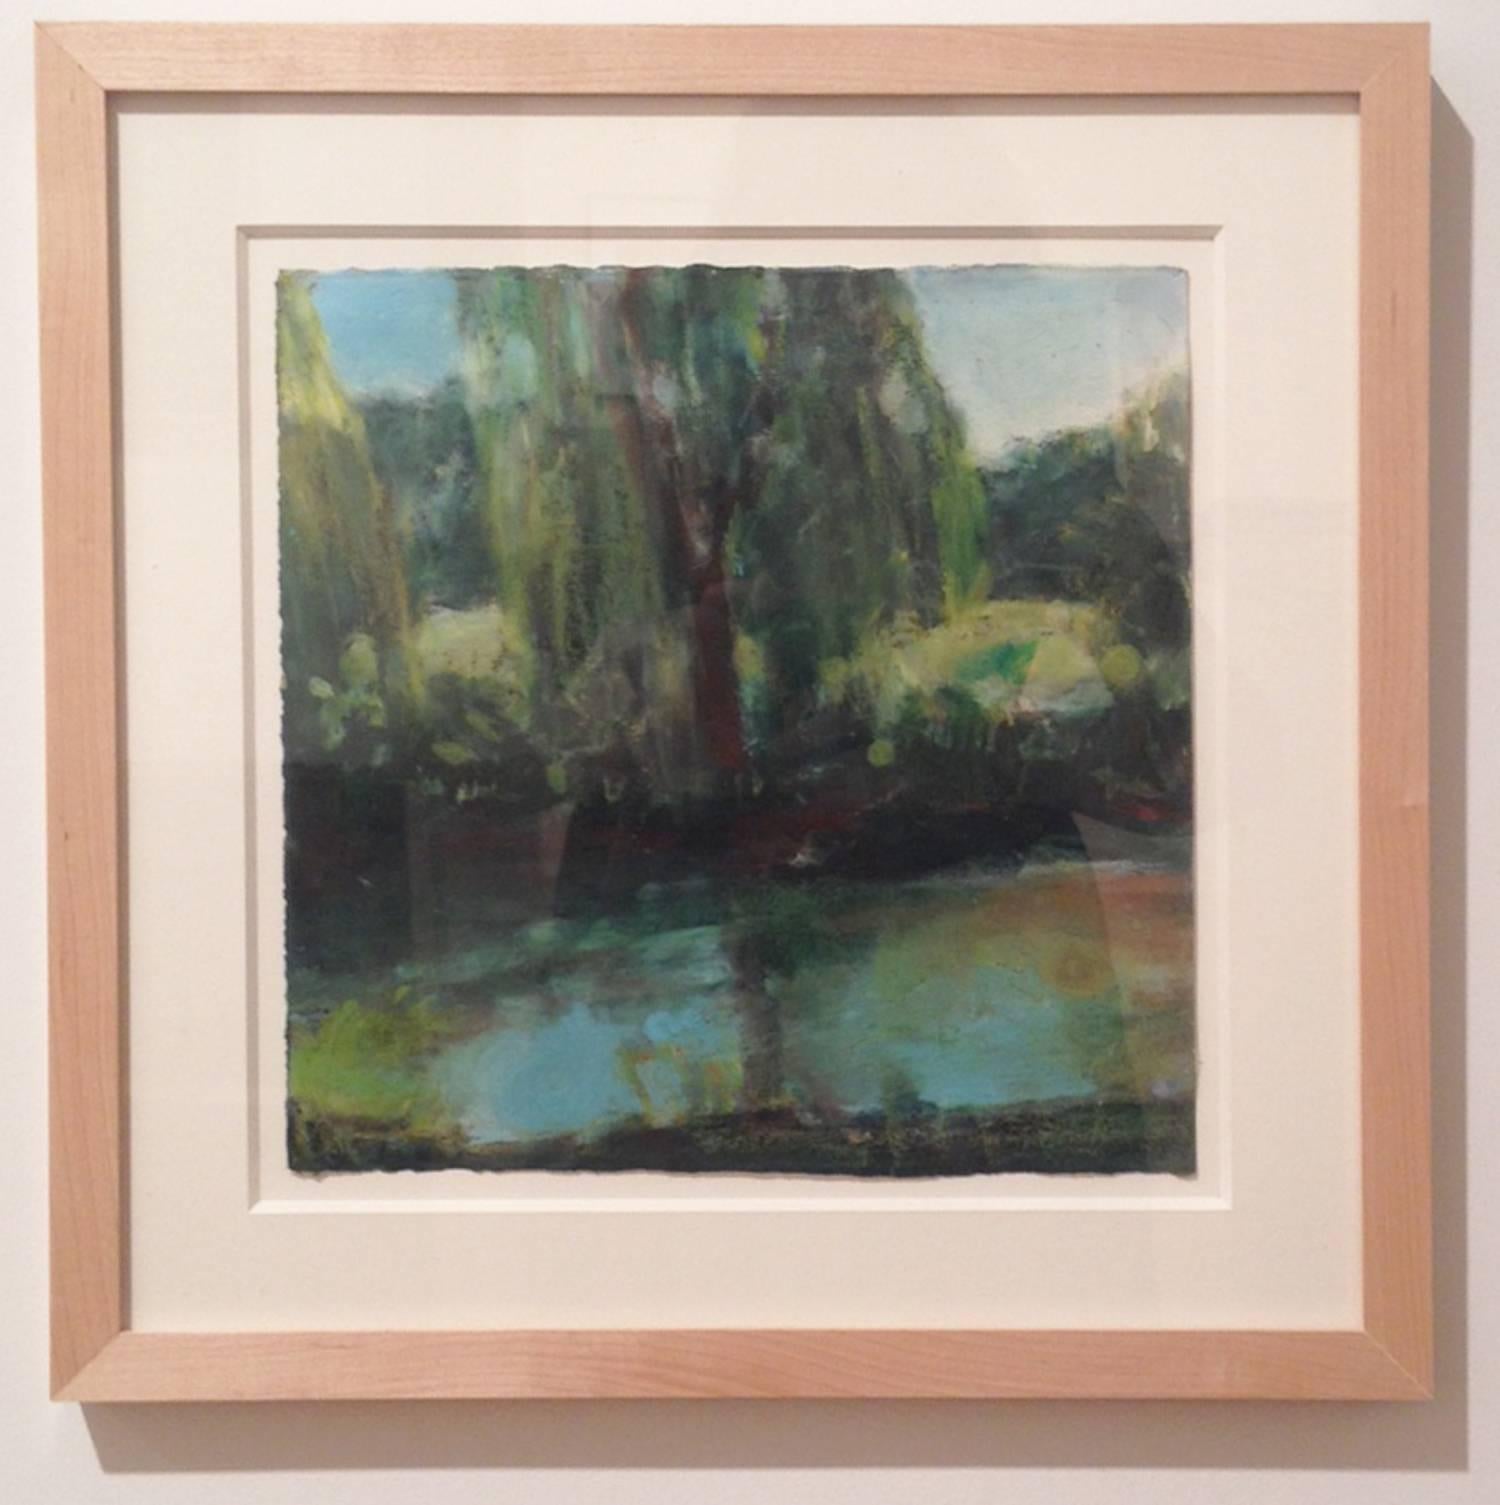 Daisy Craddock, Willow (1st Turquoise), Oil pastel landscape, 2010 1